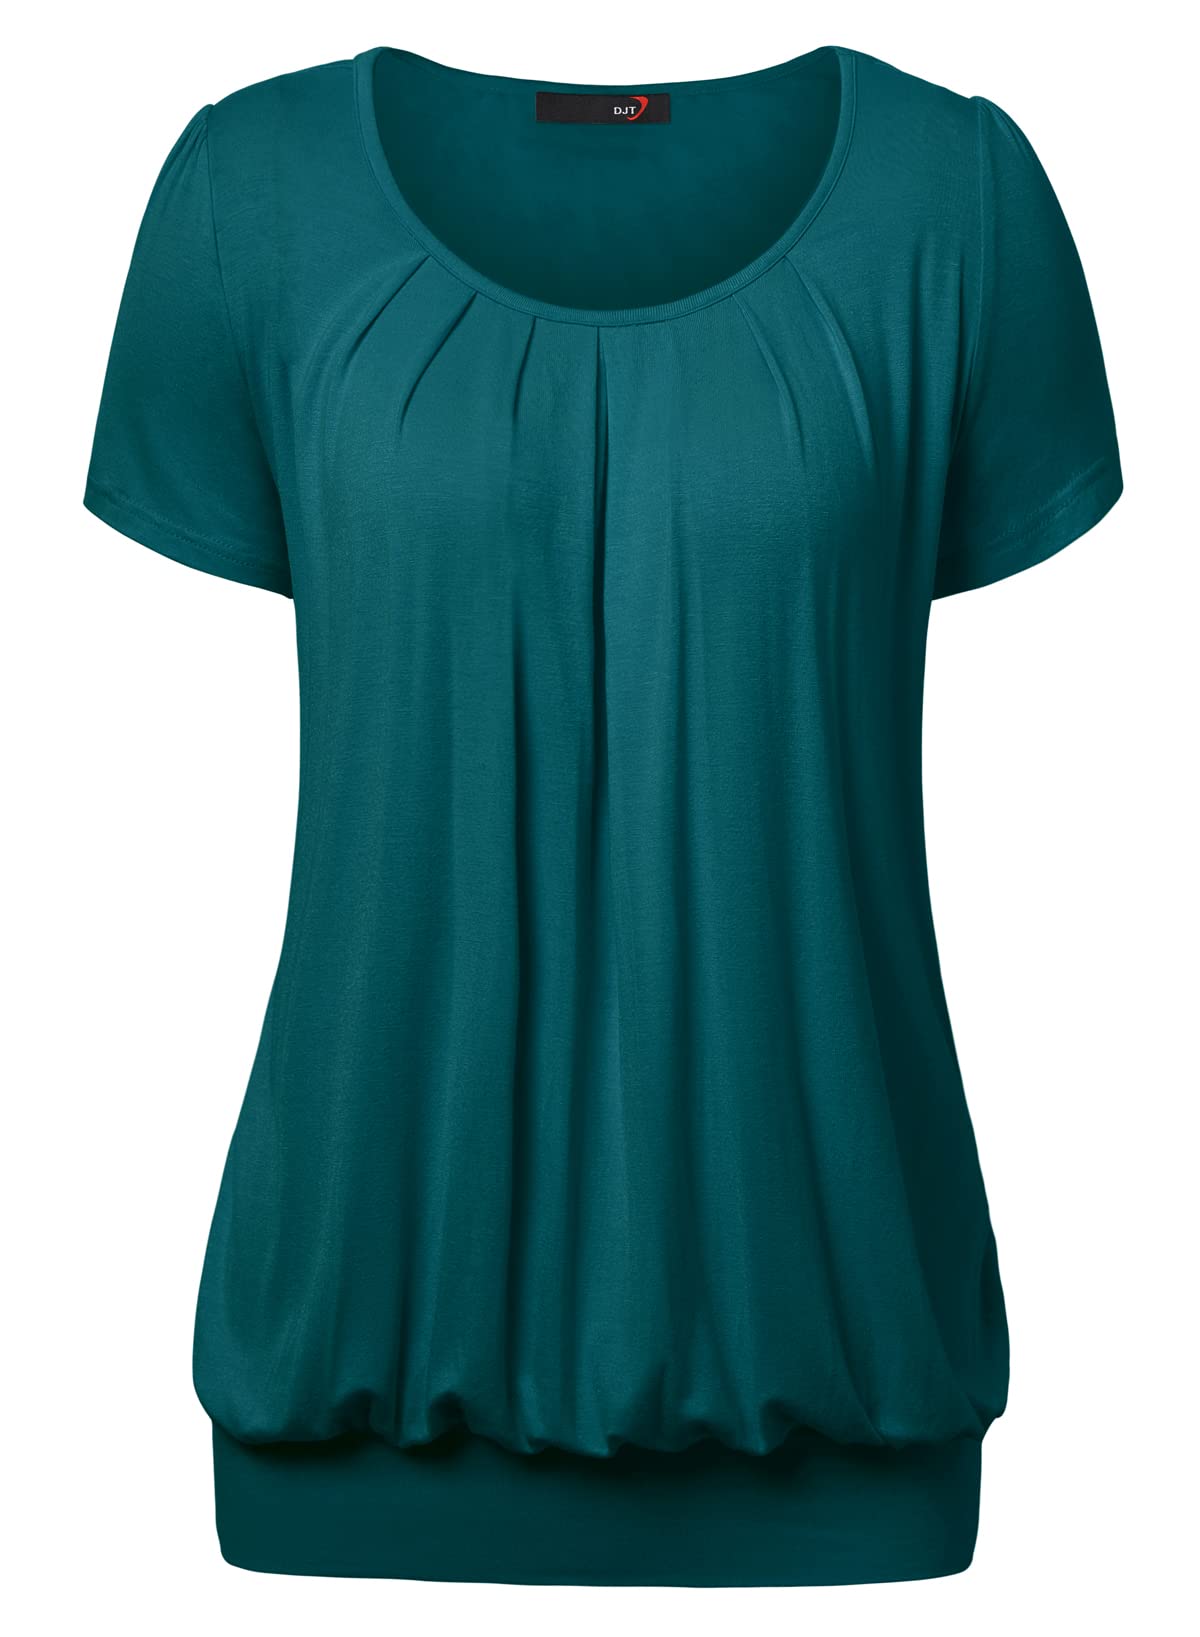 DJT Scoop Neck Teal Short Sleeve Women's Pleated Front Blouse Tunic Tops